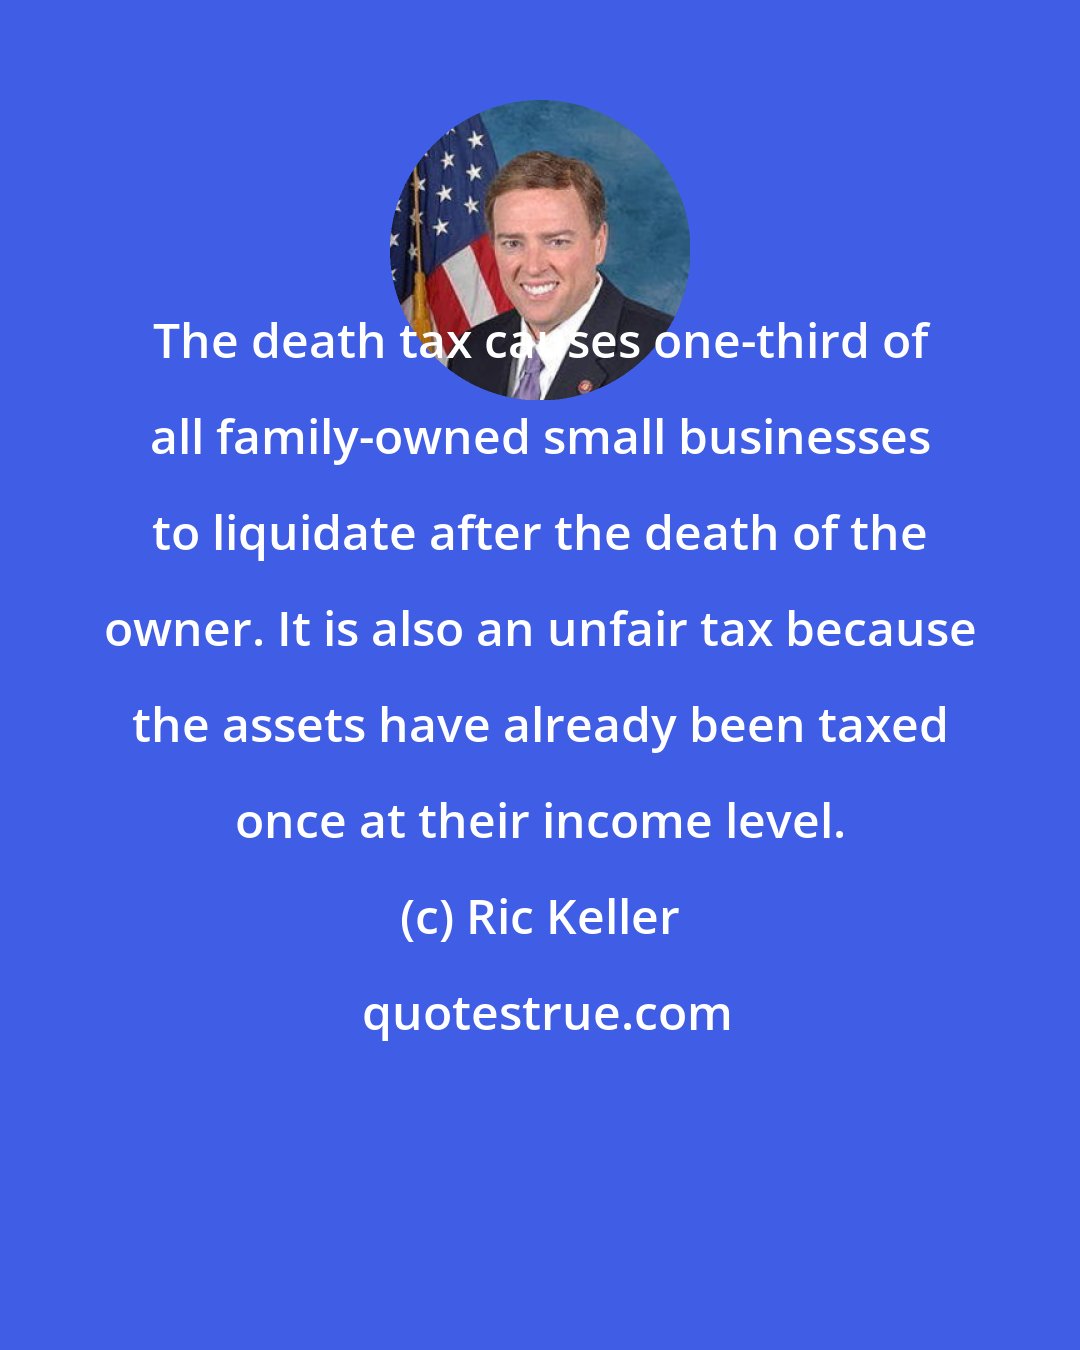 Ric Keller: The death tax causes one-third of all family-owned small businesses to liquidate after the death of the owner. It is also an unfair tax because the assets have already been taxed once at their income level.